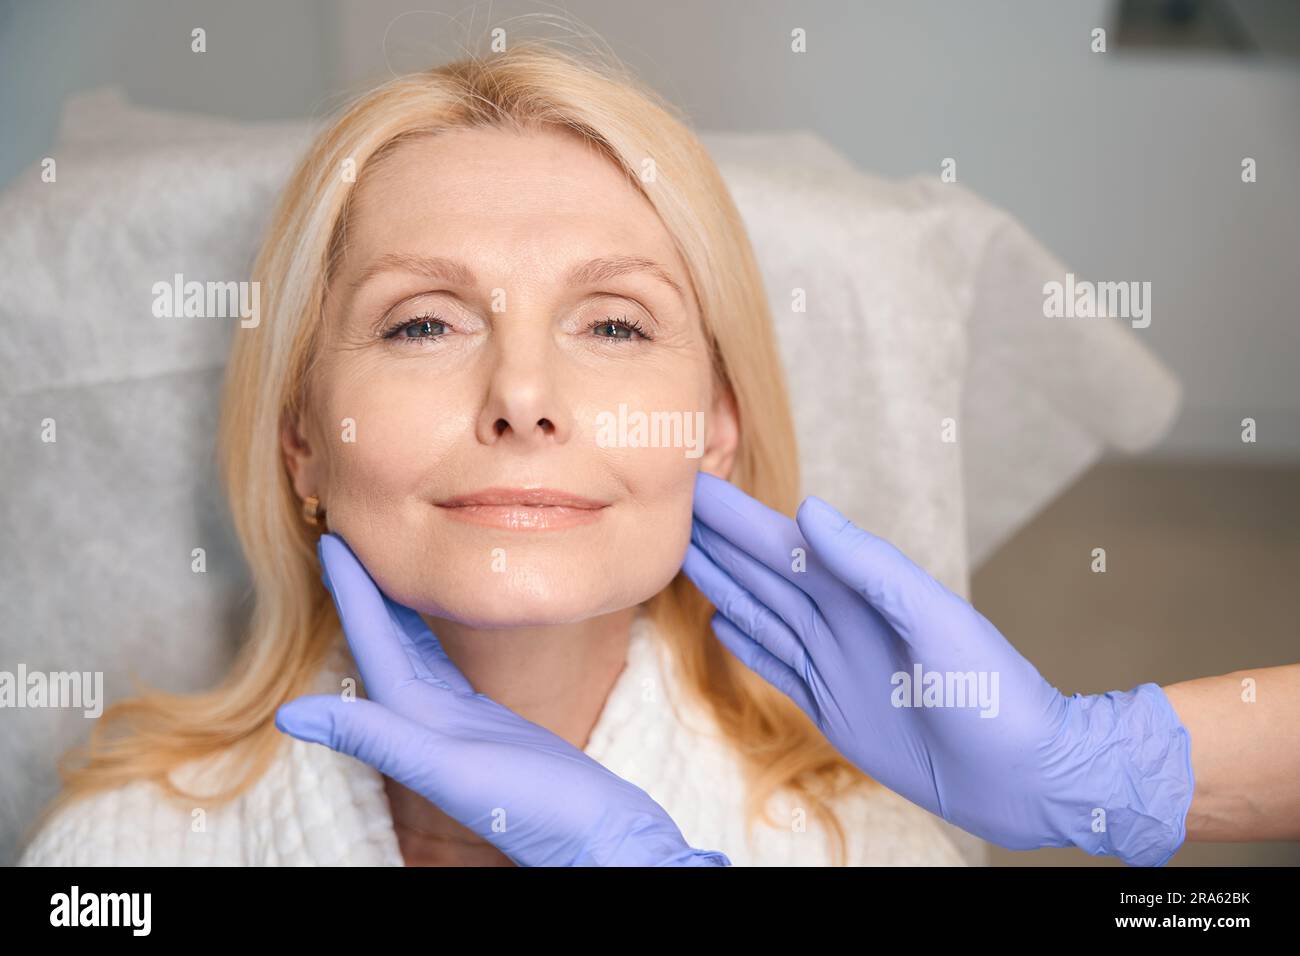 Hands in medical gloves touching happy woman face Stock Photo